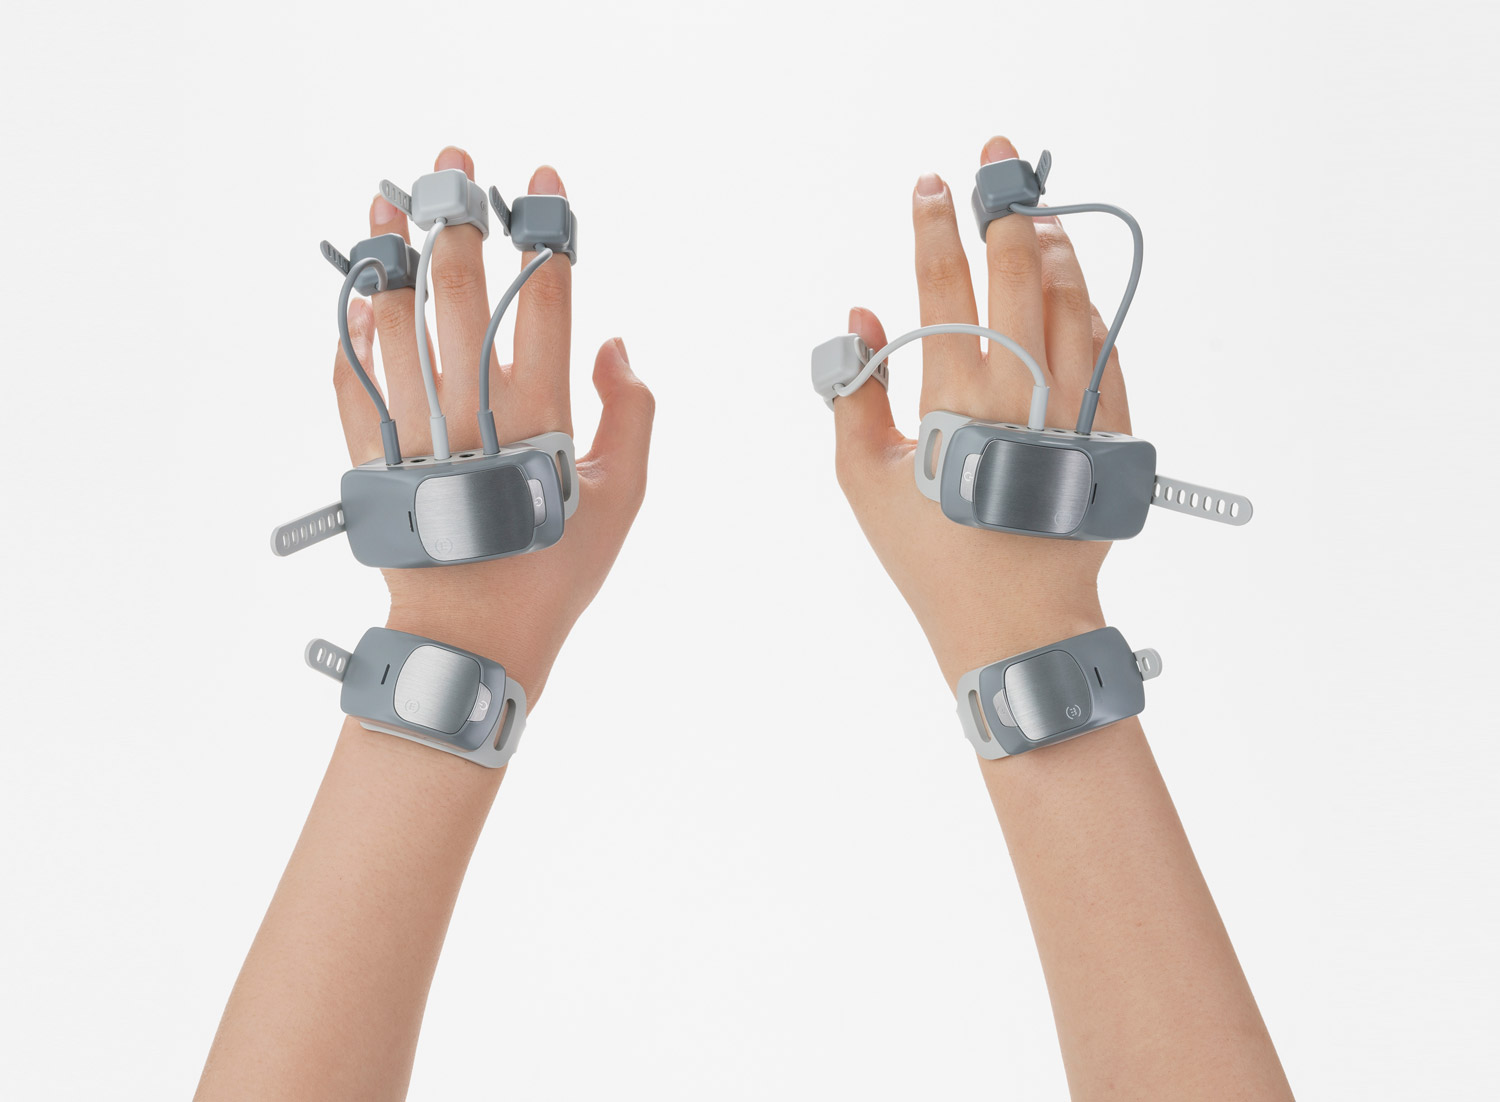 Manovivo is a wearable smart glove designed to monitor and train the impaired hand in daily life